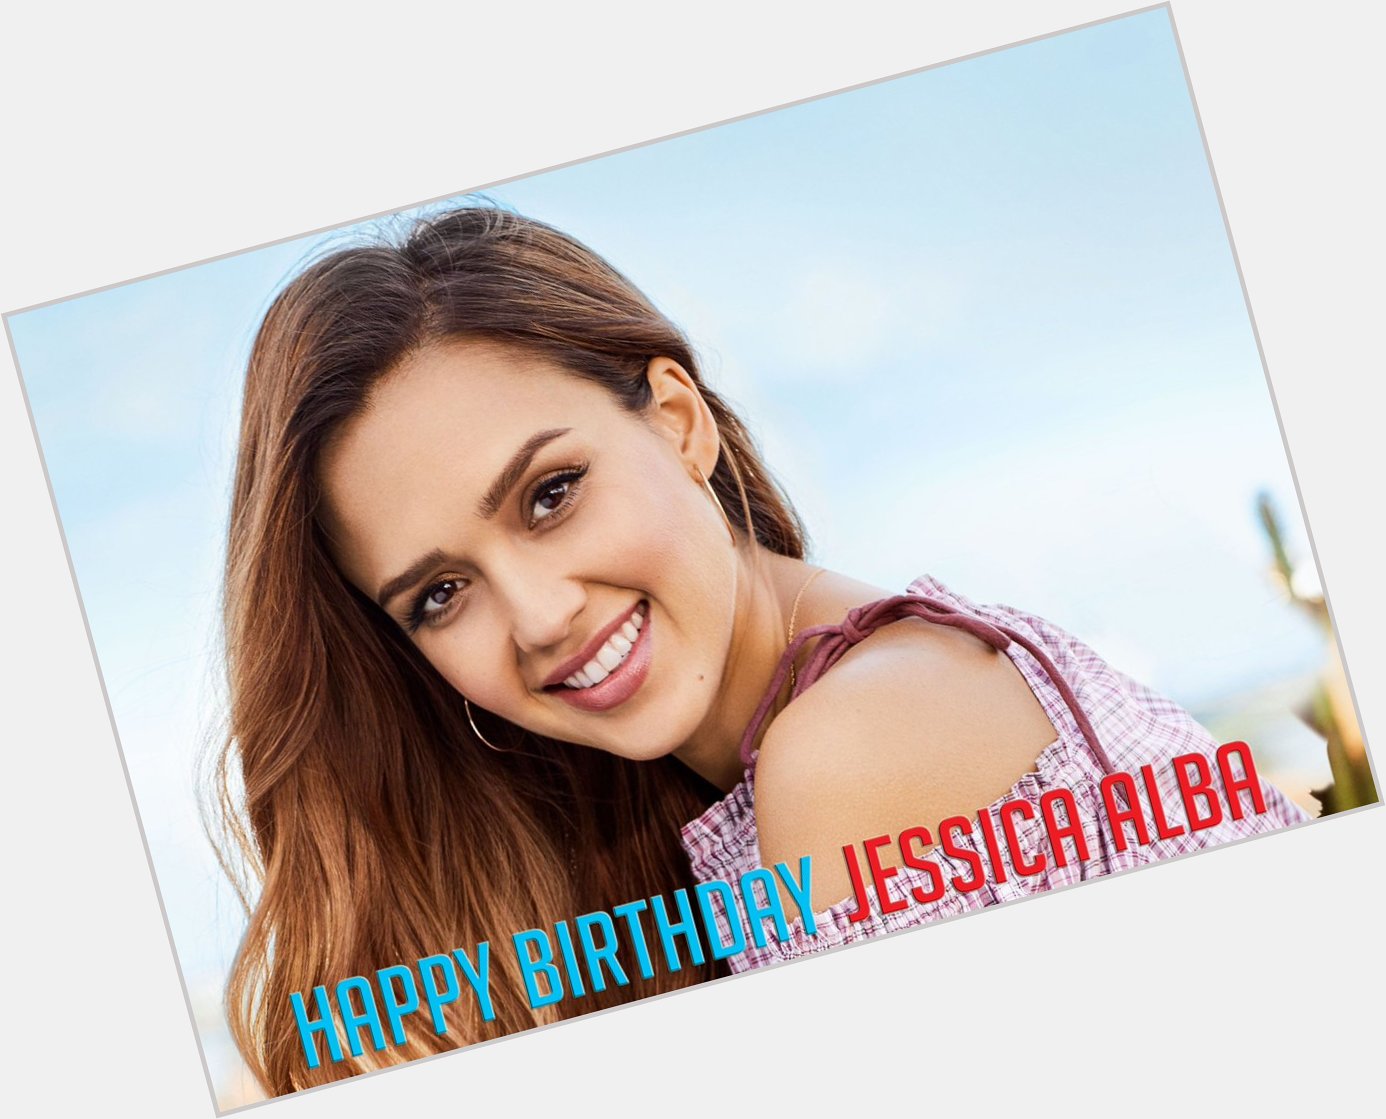 Indywood wishing a Happy Birthday to Jessica Alba!! Stay Blessed...   